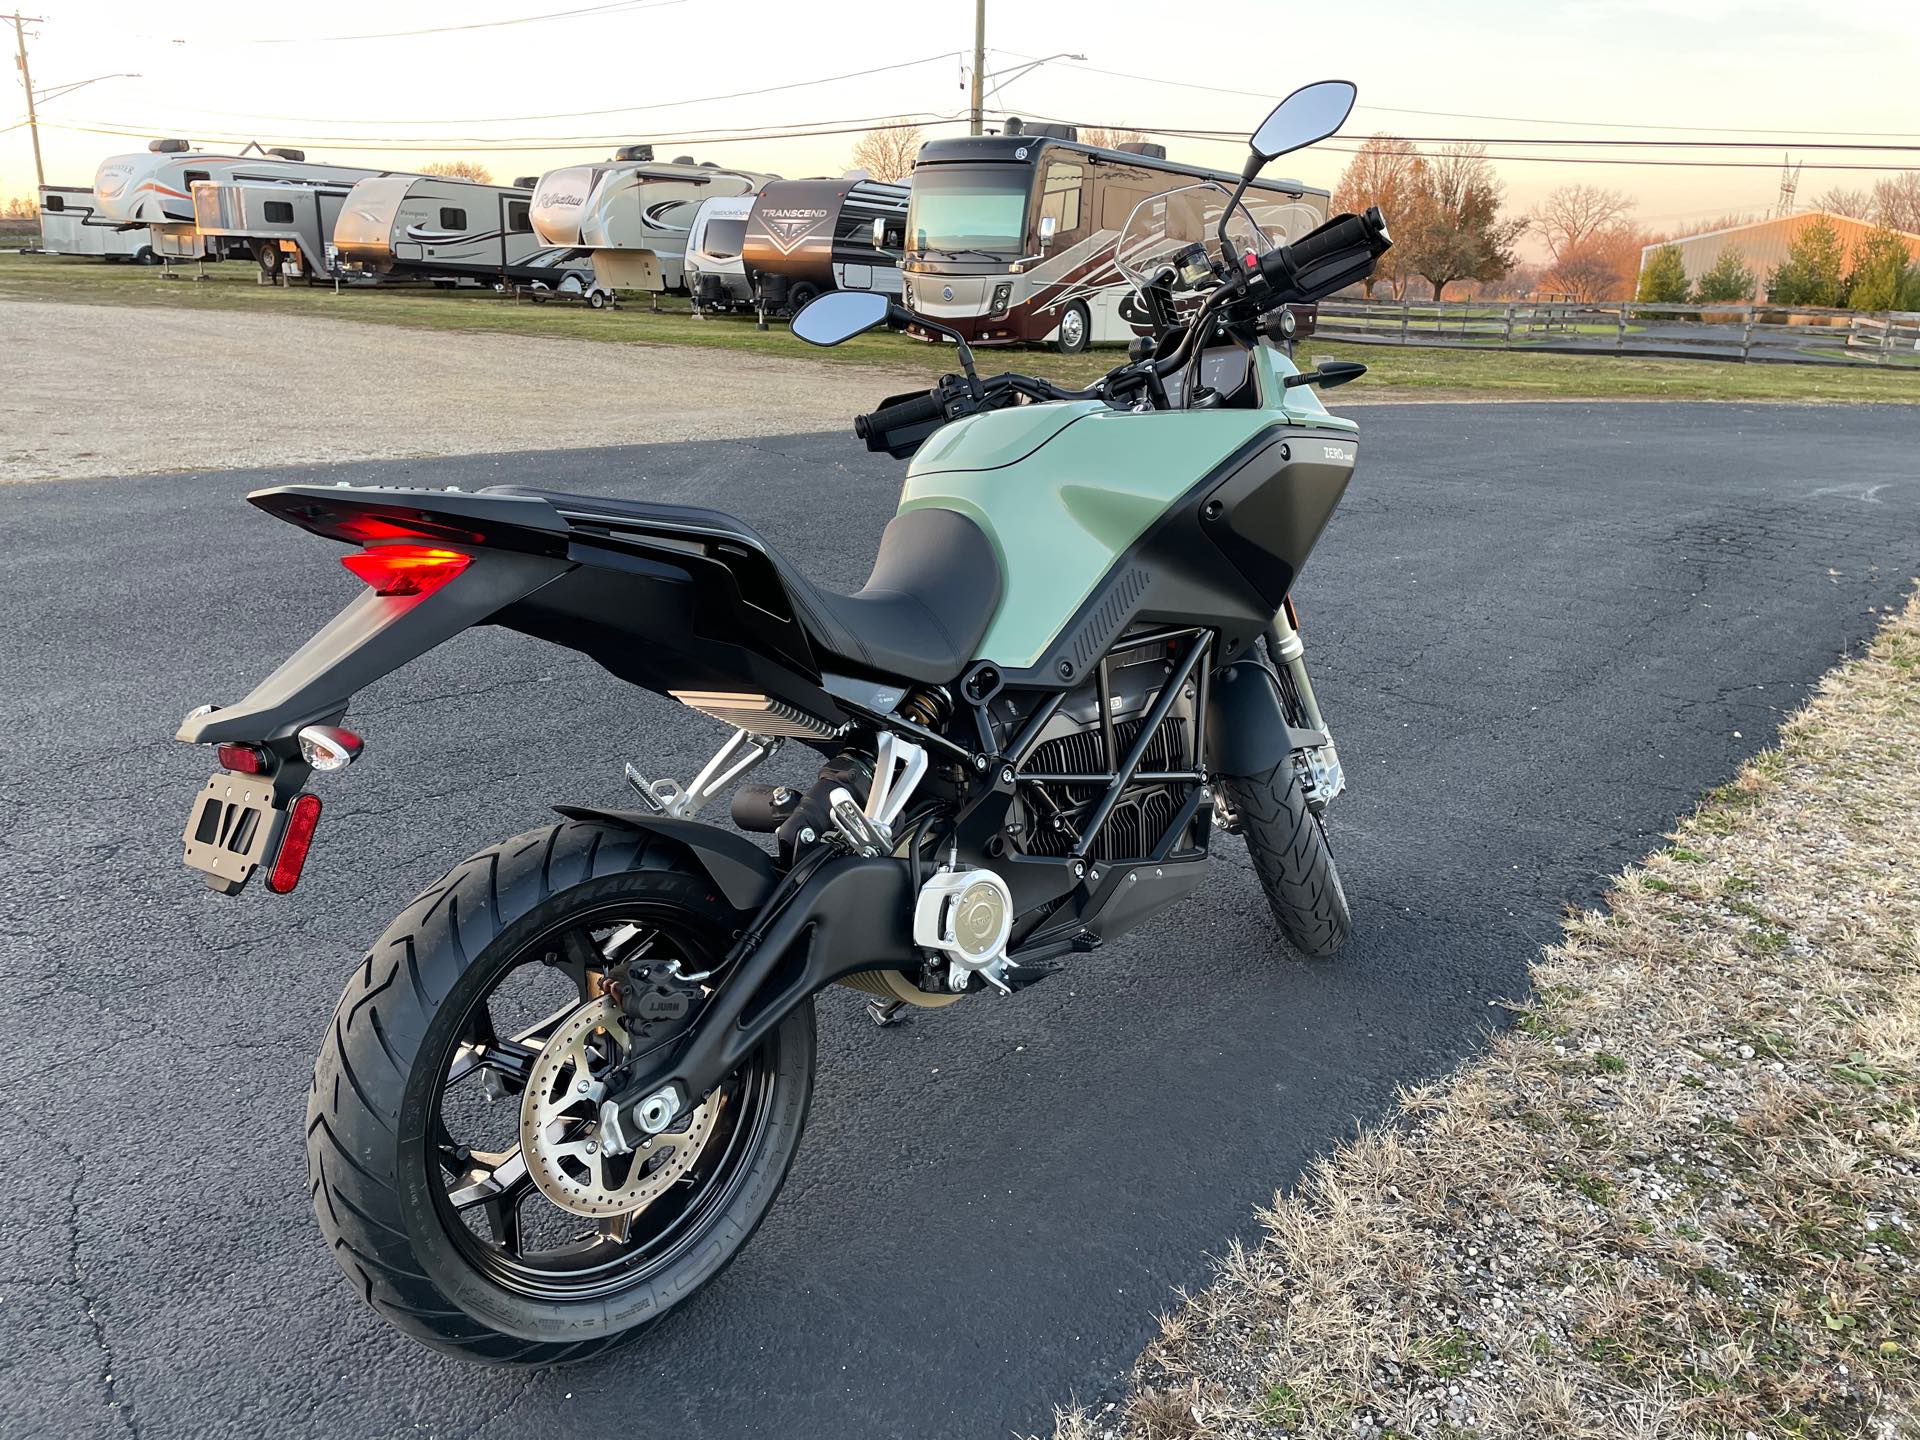 2023 Zero DSR/X ZF17.3 at Randy's Cycle